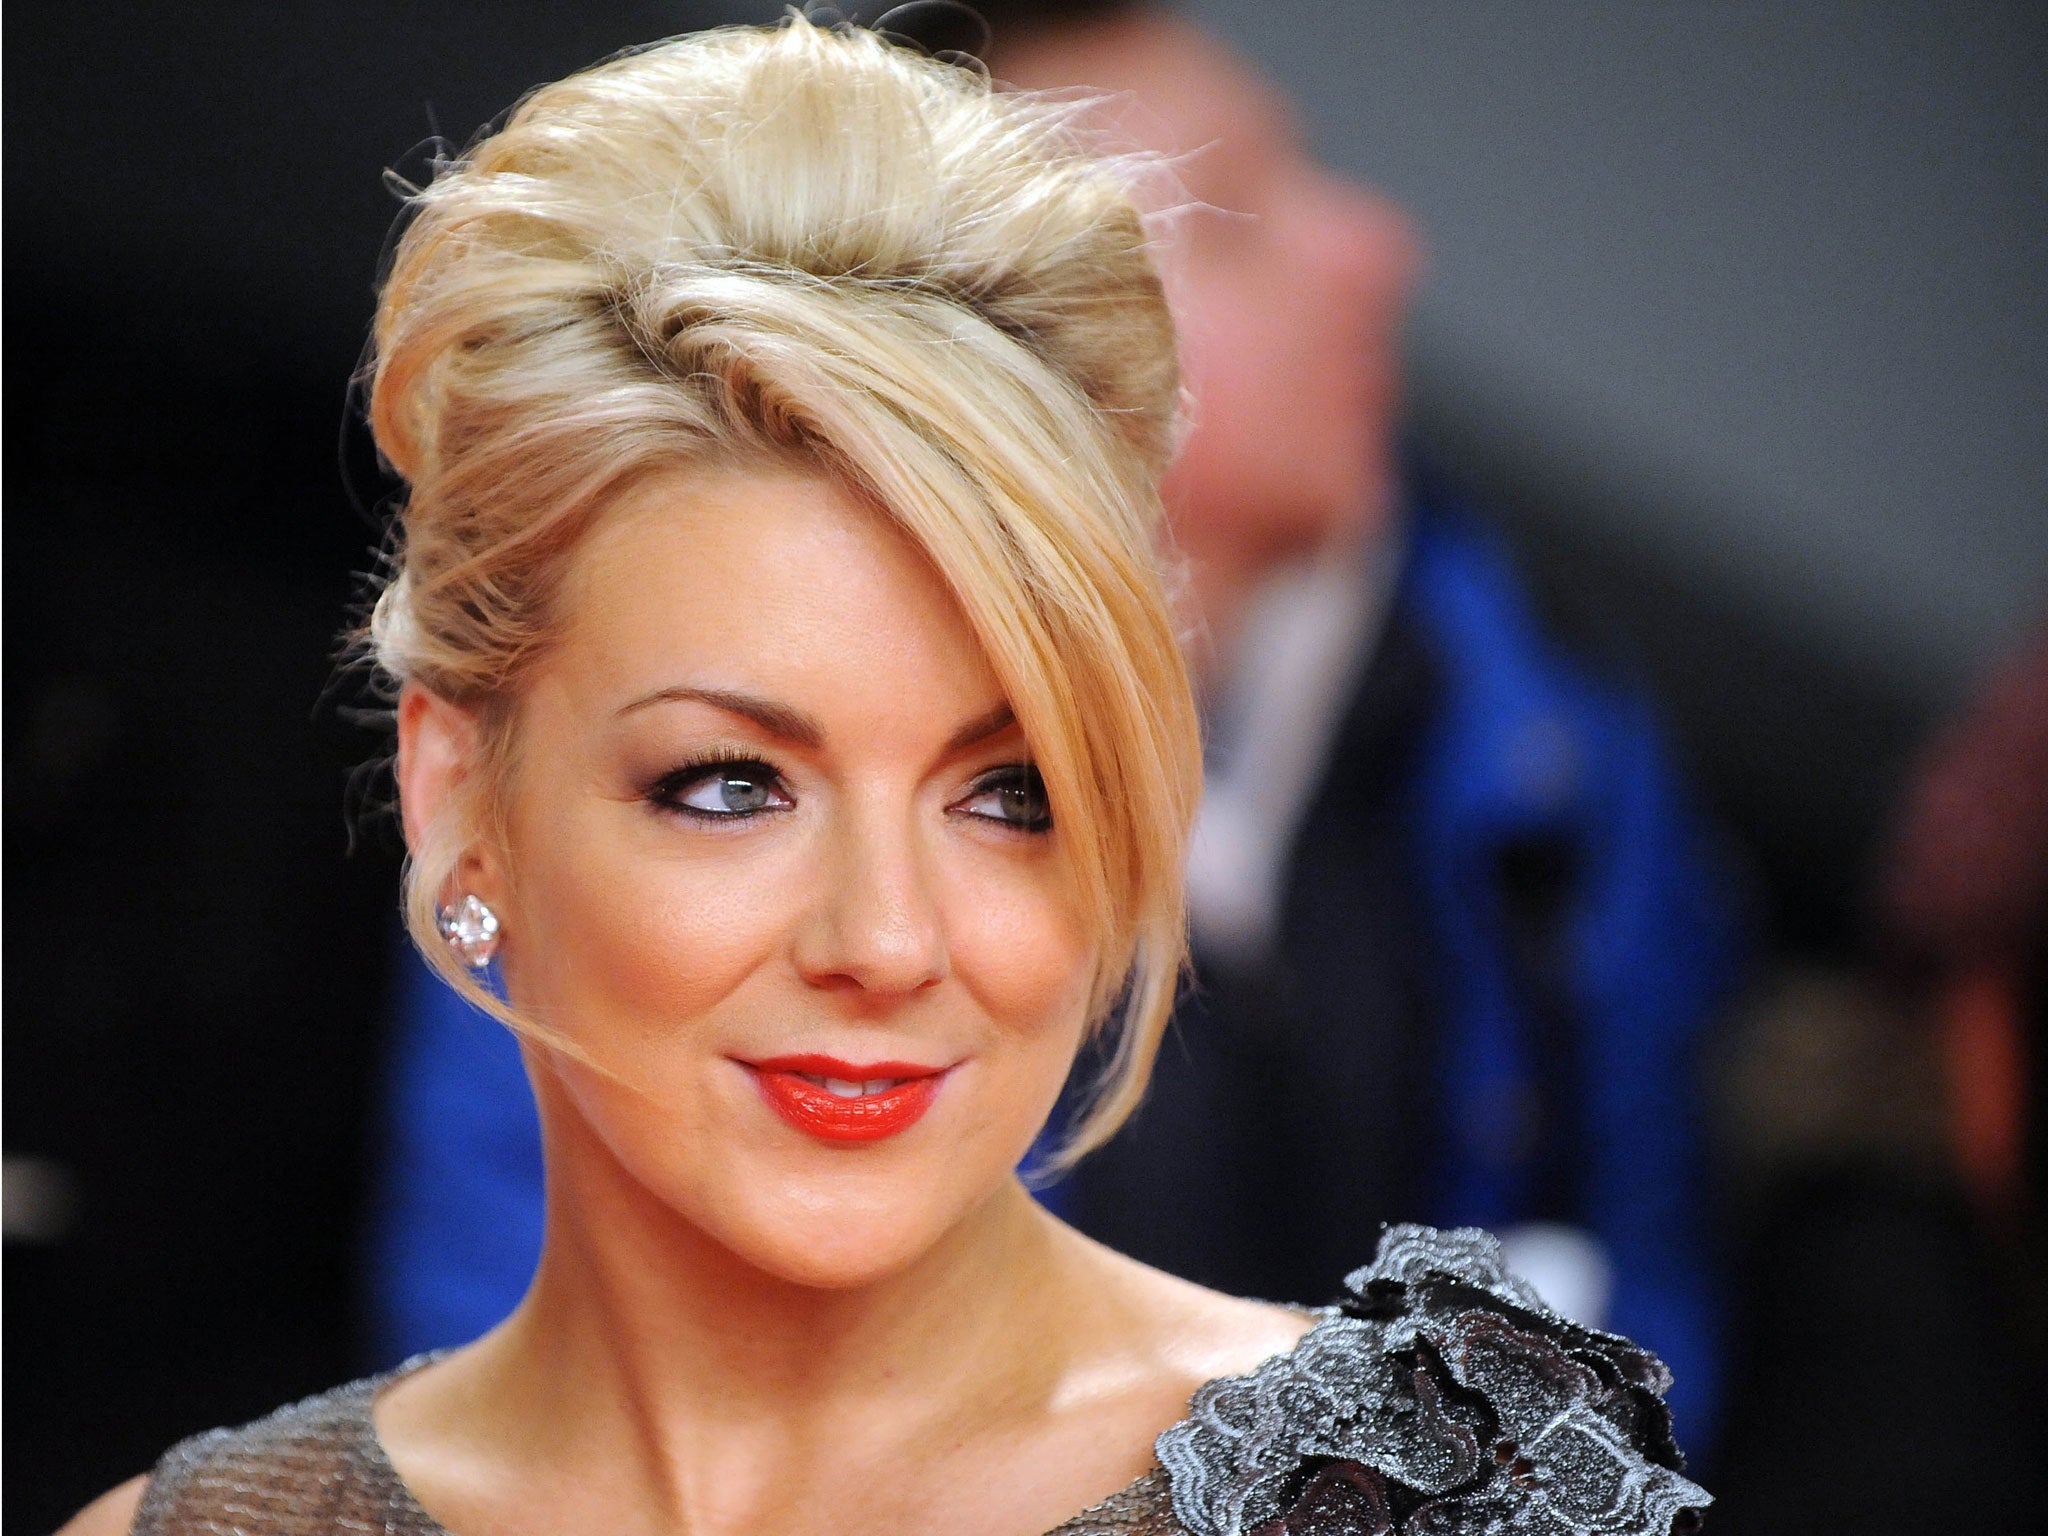 Actress Sheridan Smith has been widely praised for several roles